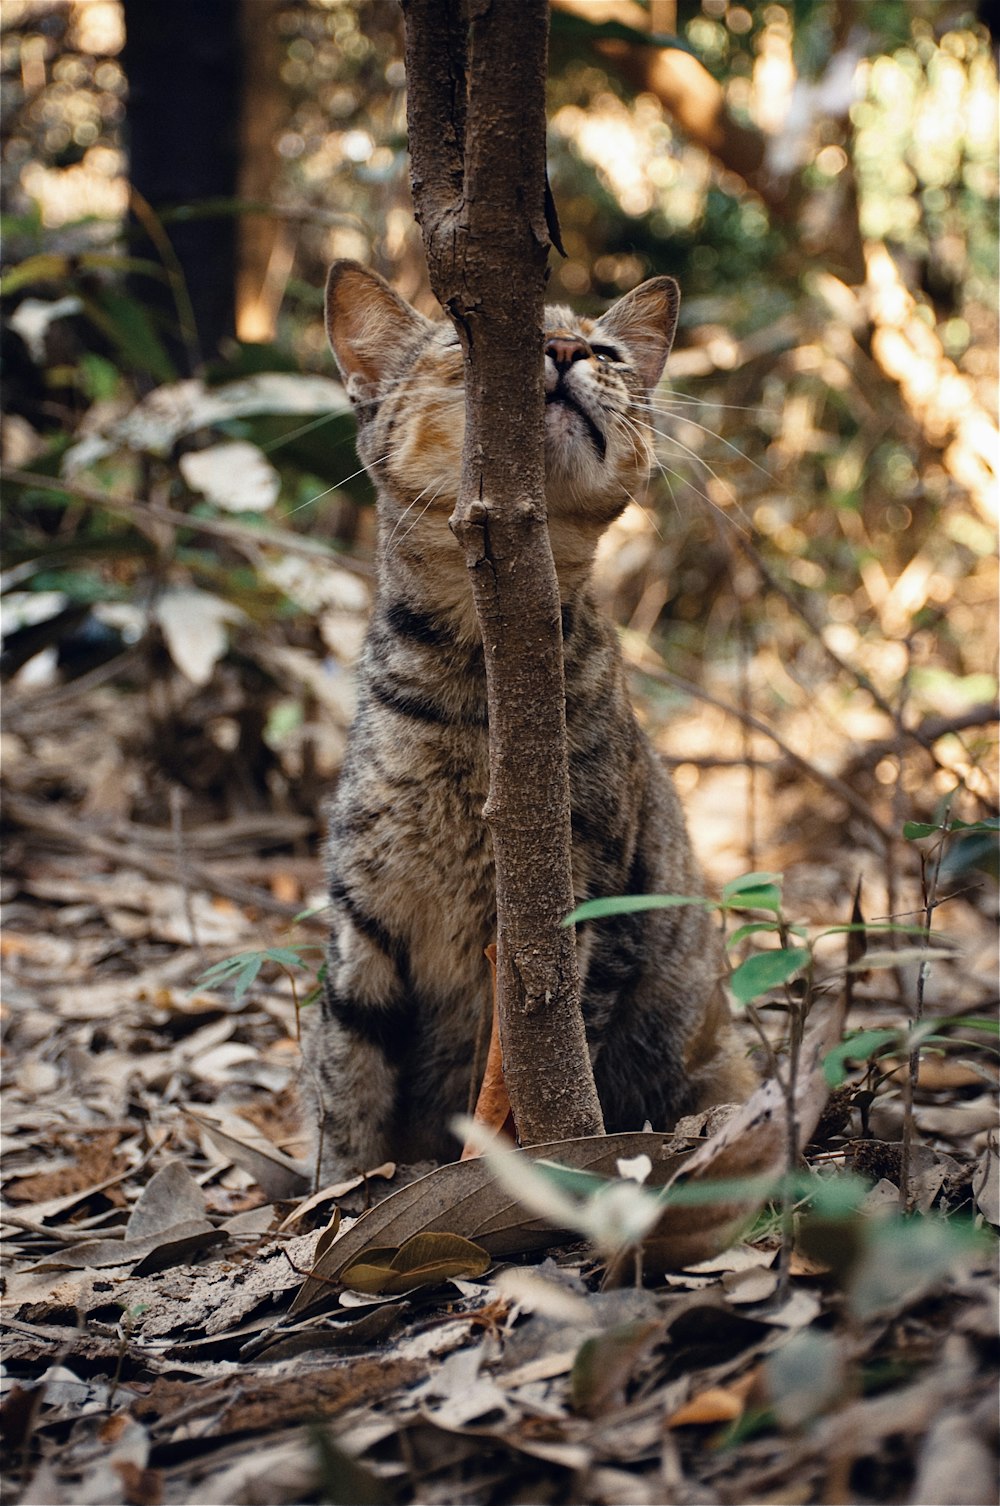 brown tabby cat on brown dried leaves during daytime